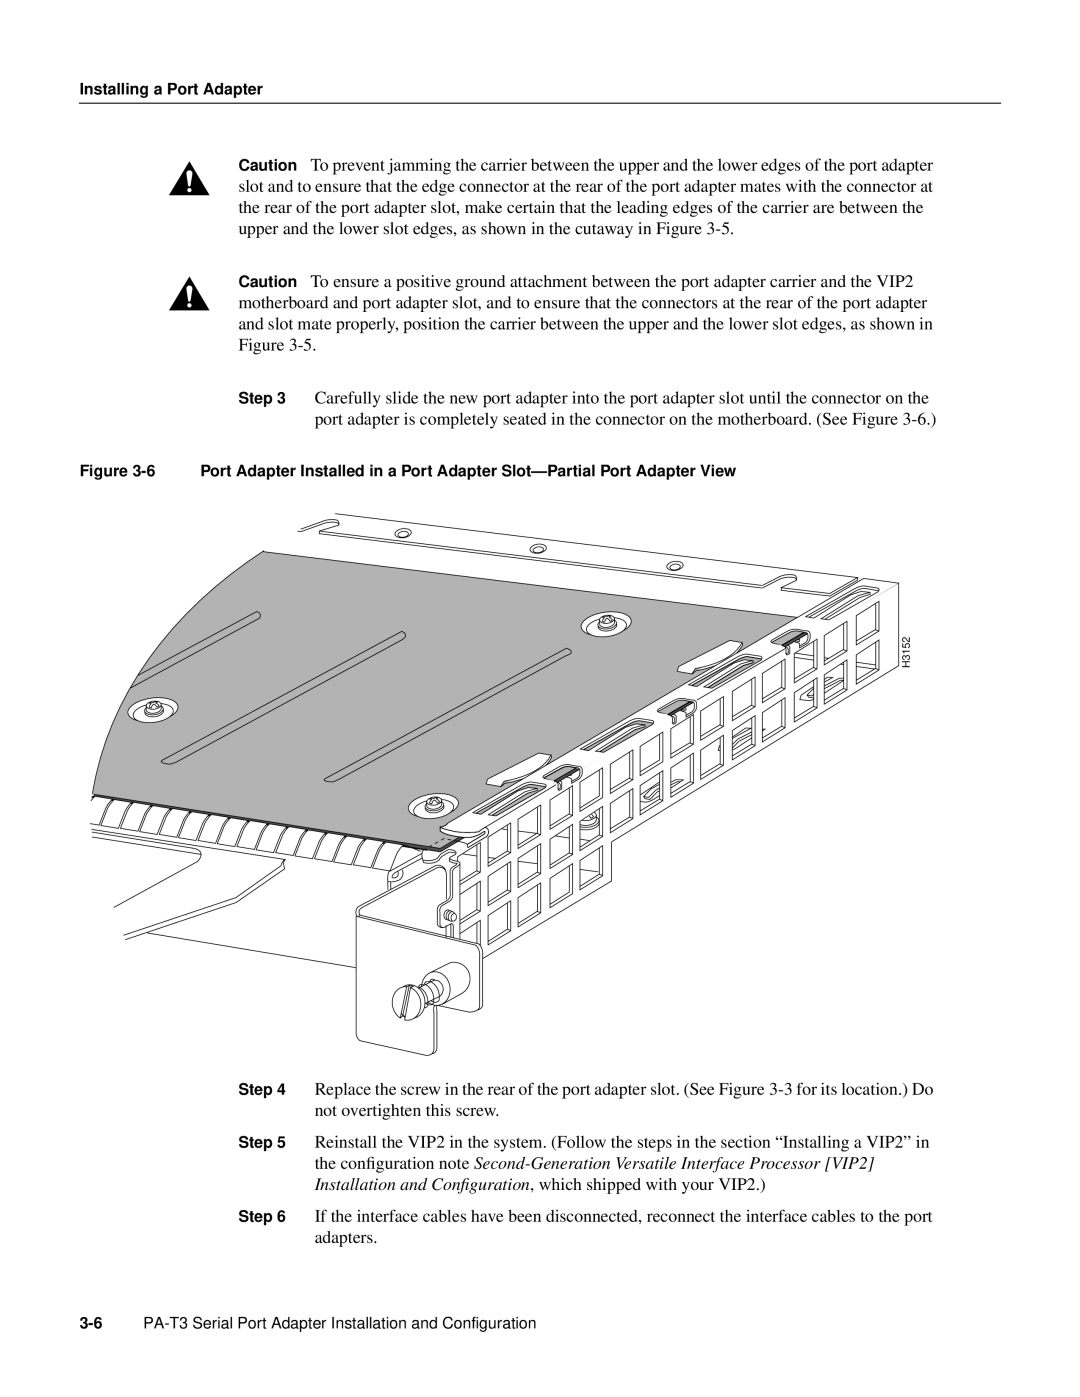 Cisco Systems manual PA-T3 Serial Port Adapter Installation and Configuration, H3152 